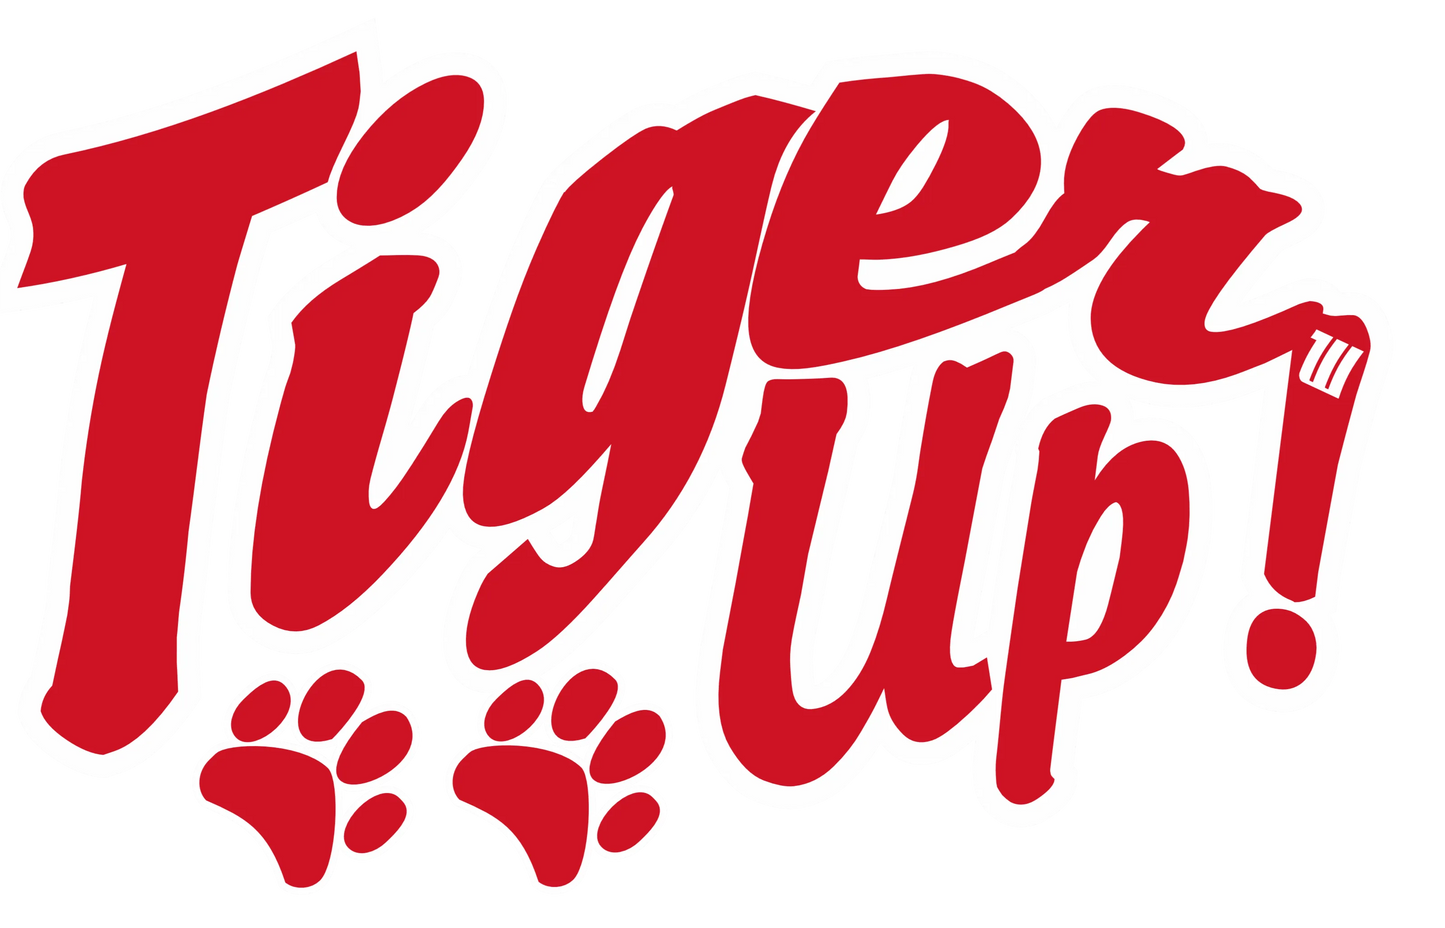 WU-2 - Tiger Up, DTF Transfer, Apparel & Accessories, Ace DTF